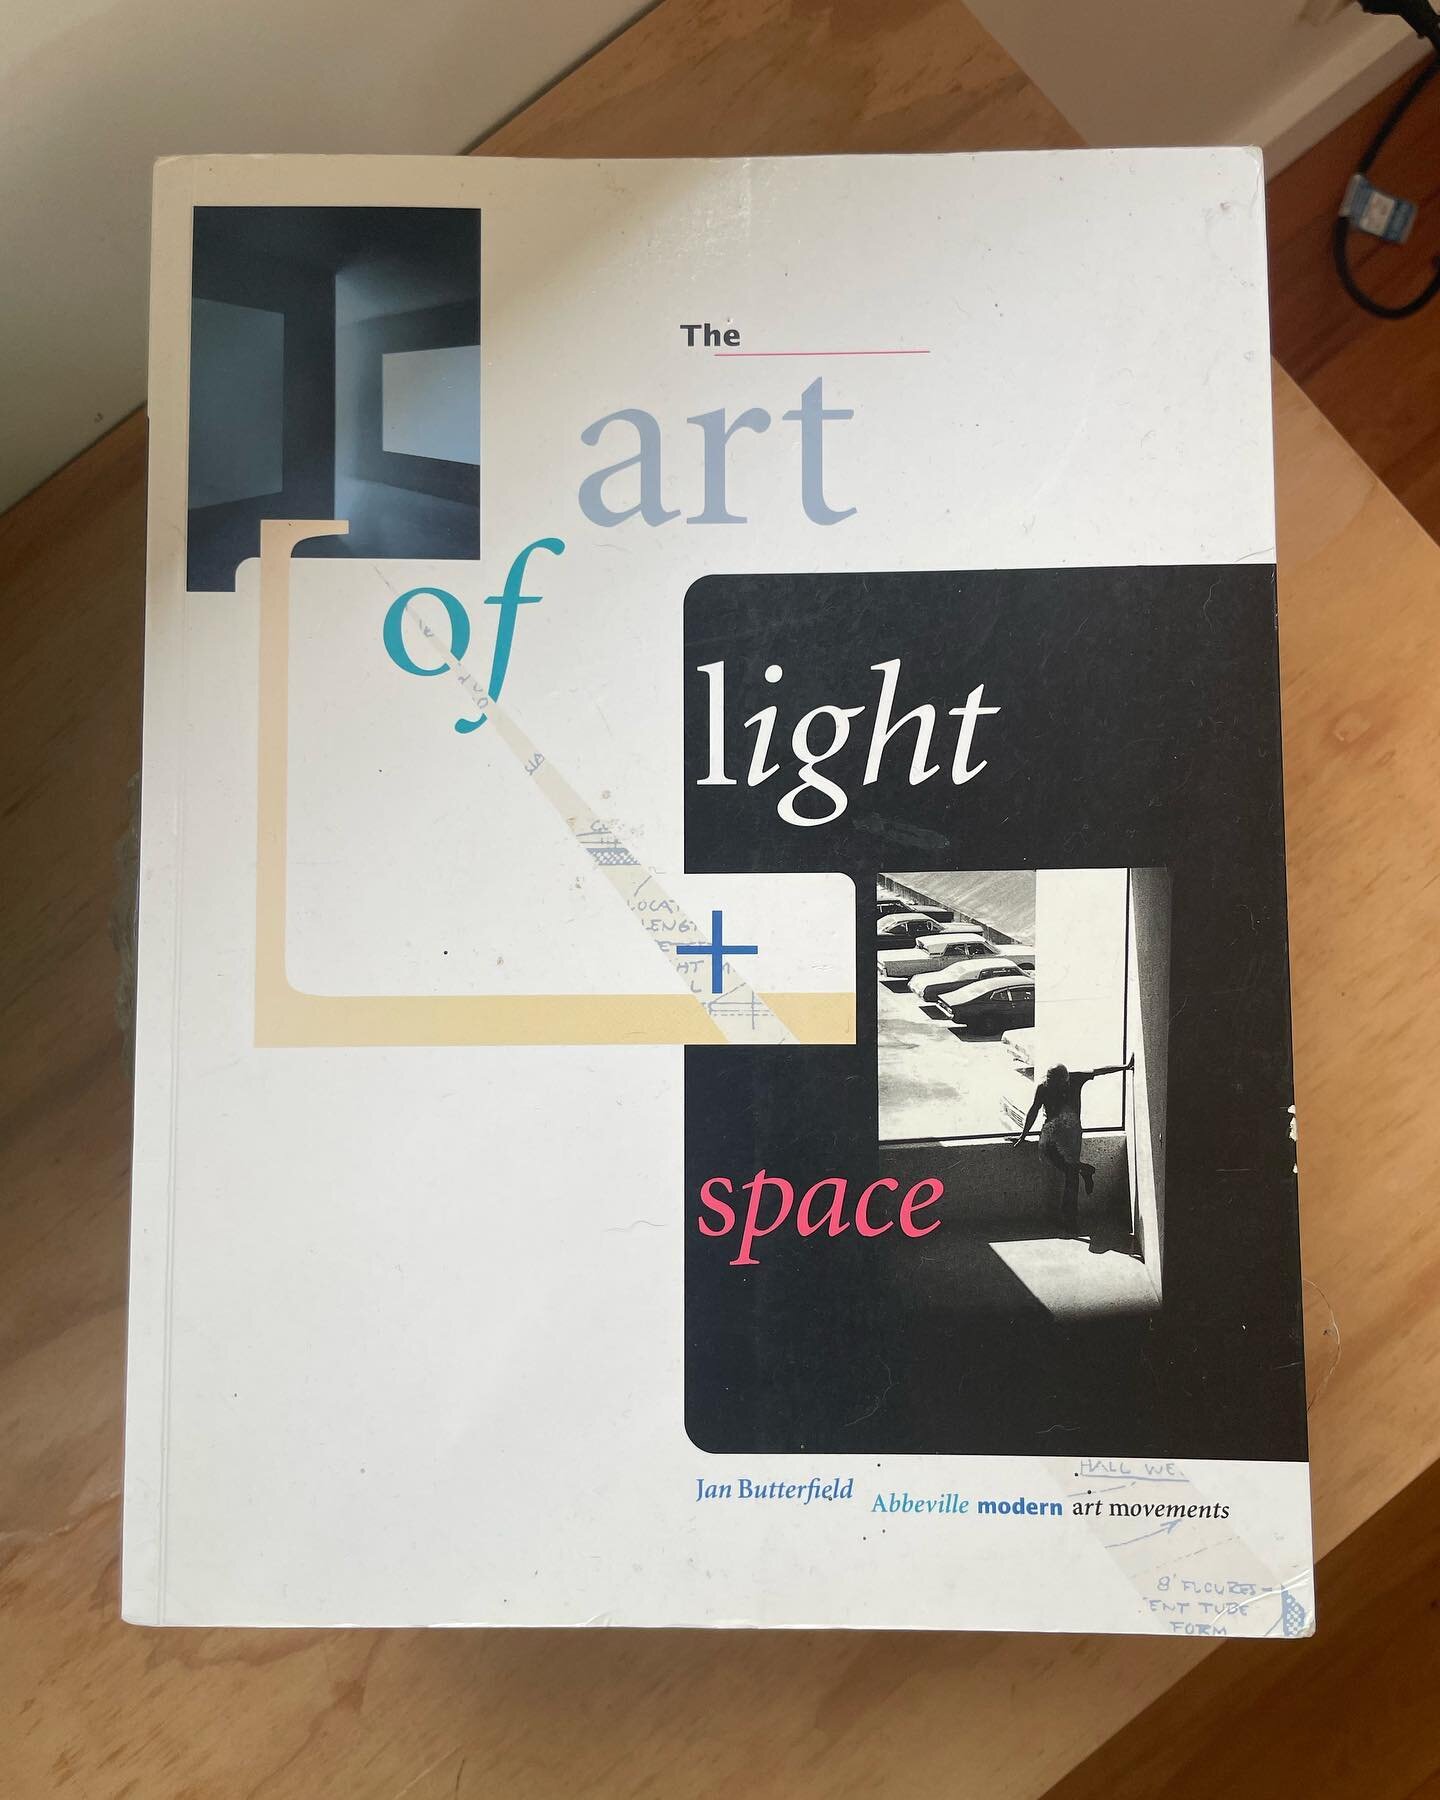 Necessary reading for all #lightartists  My inspiration through #art school (but there is so much more) #lightart #light #colour #space #led #inspiration #sculpture #installationart #contemporaryart #gallery #artcollector #trishcampbell